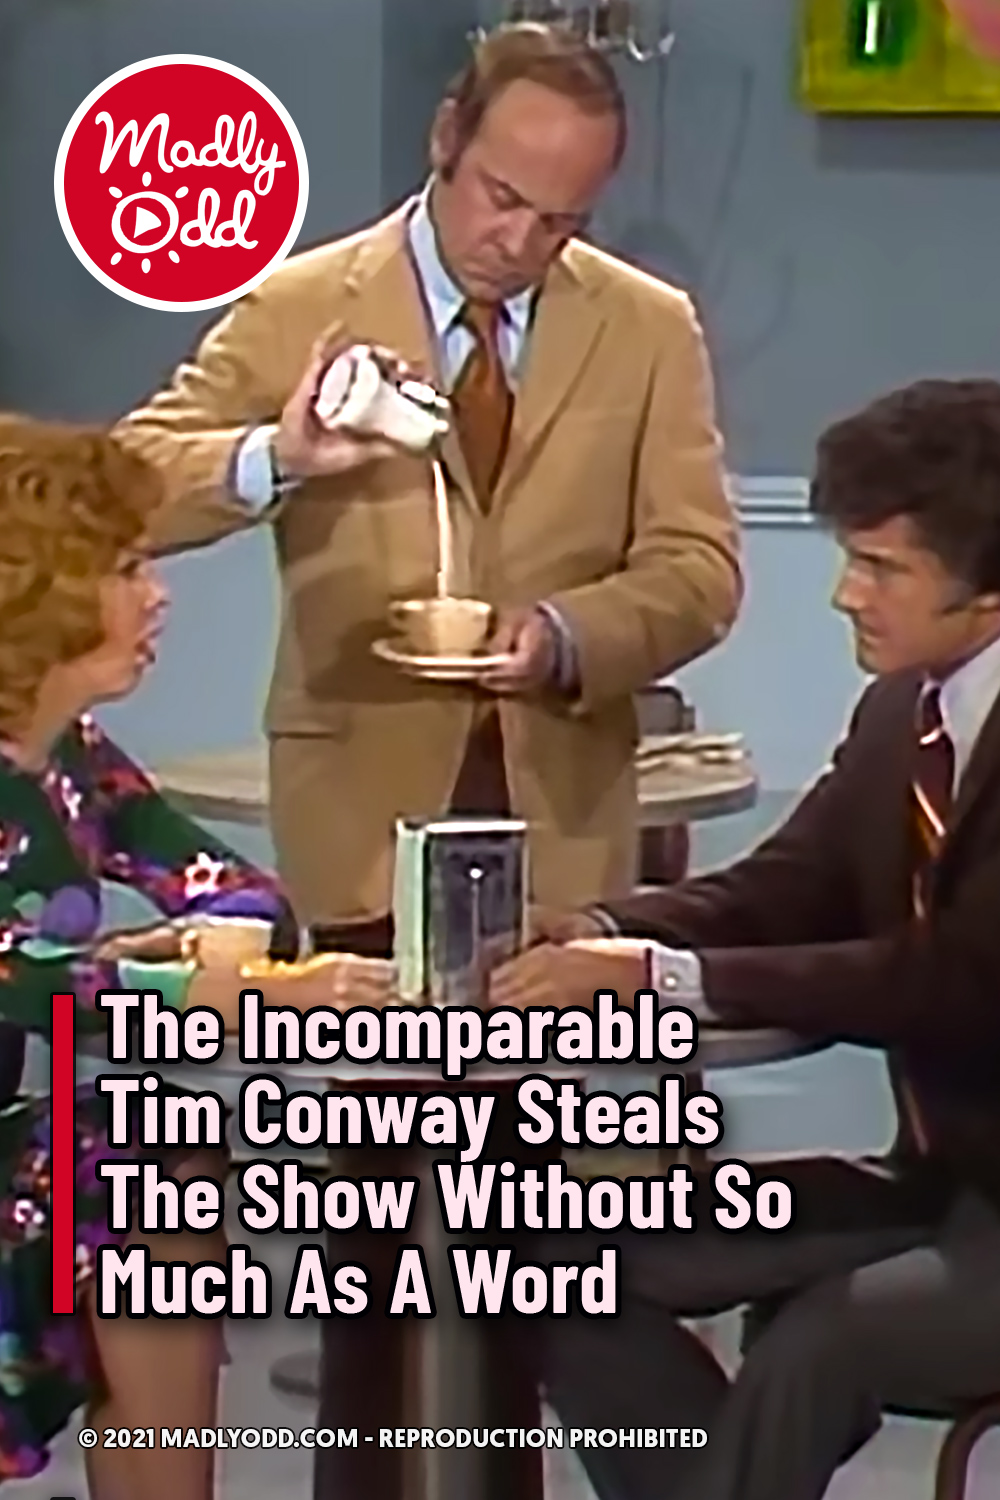 The Incomparable Tim Conway Steals The Show Without So Much As A Word